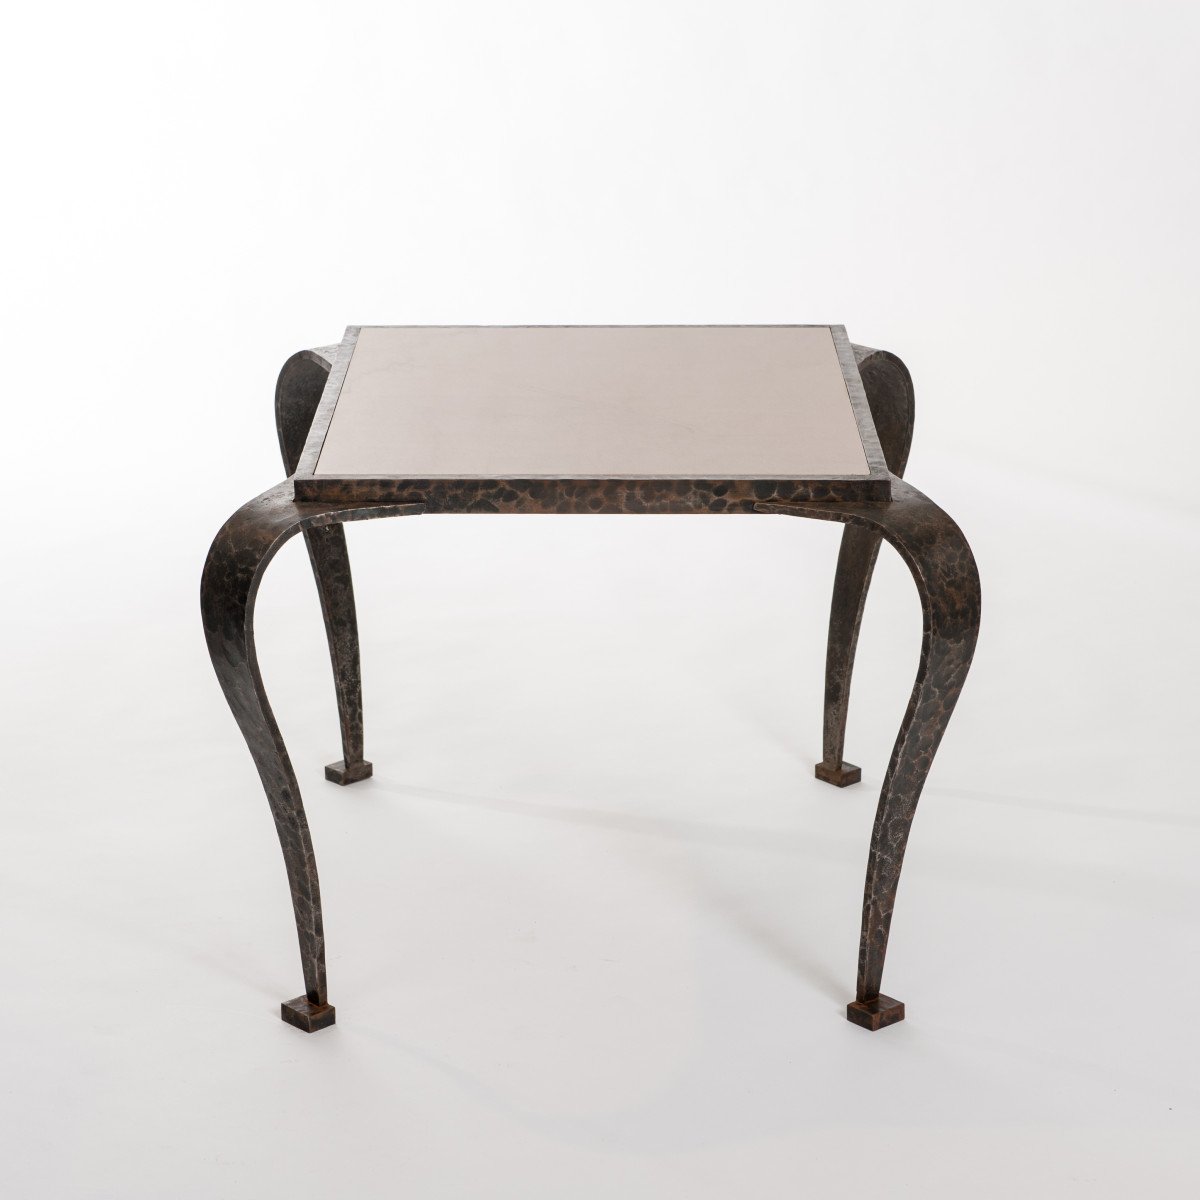 Italian Art Déco Side Table Solid Iron With Marble Top Attributed To V. Ducrot